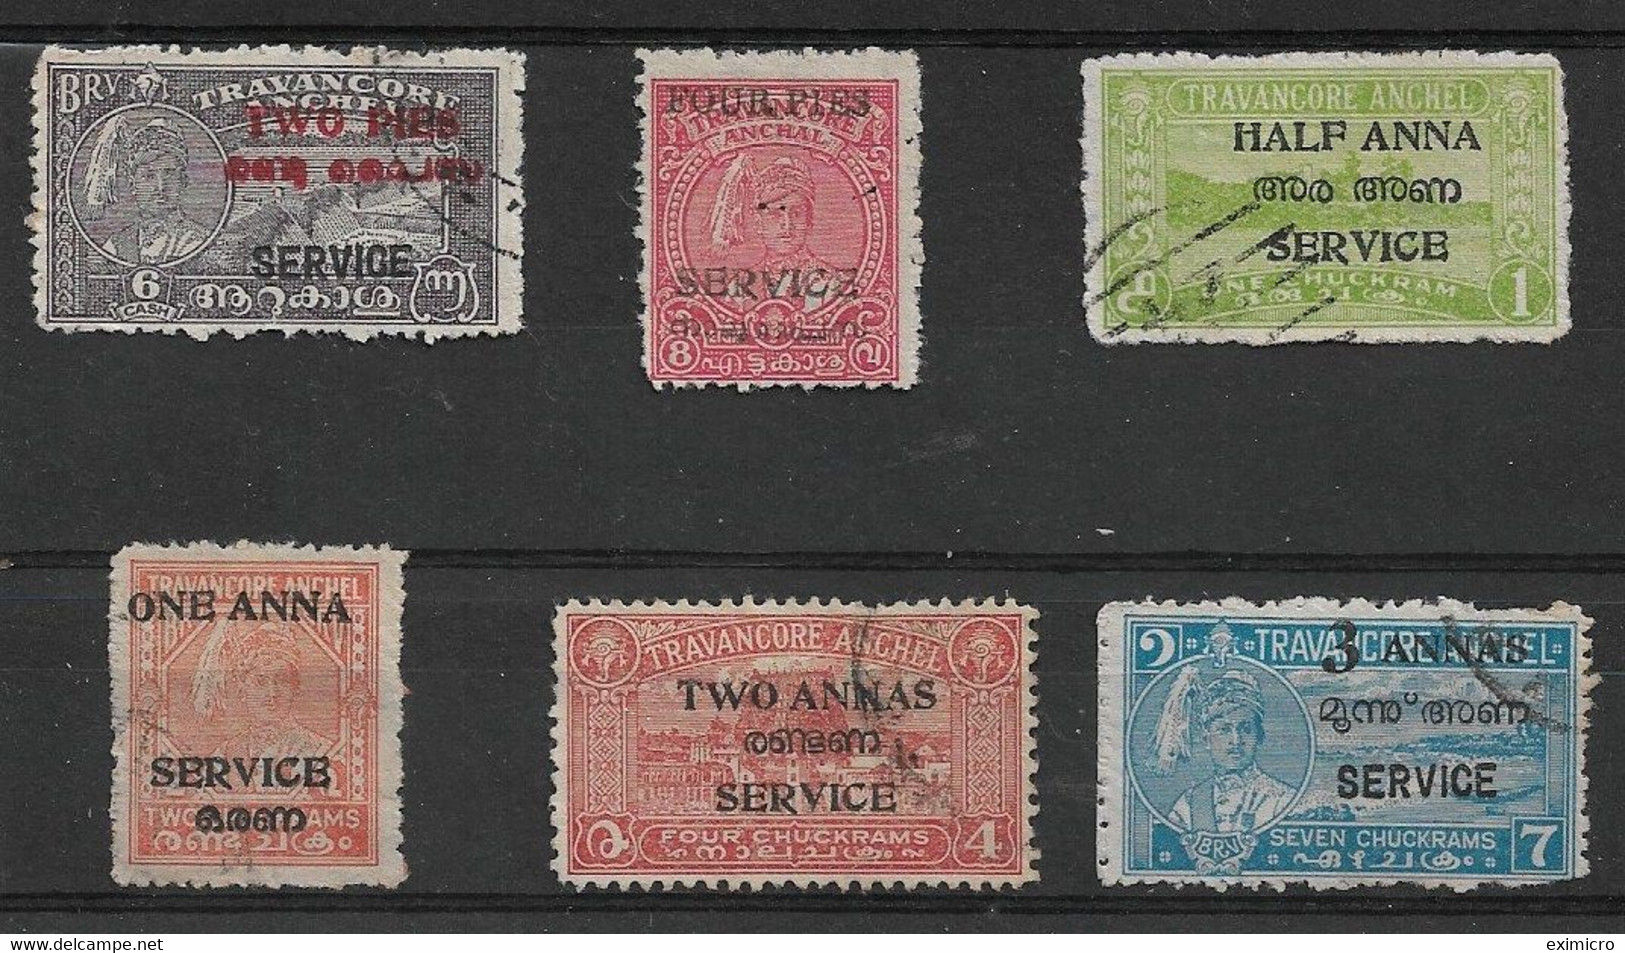 INDIA - TRAVANCORE - COCHIN 1949 - 1951 OFFICIALS TO 3a On 7ch BETWEEN SG O1f And SG O6dd FINE USED Cat £17+ - Travancore-Cochin